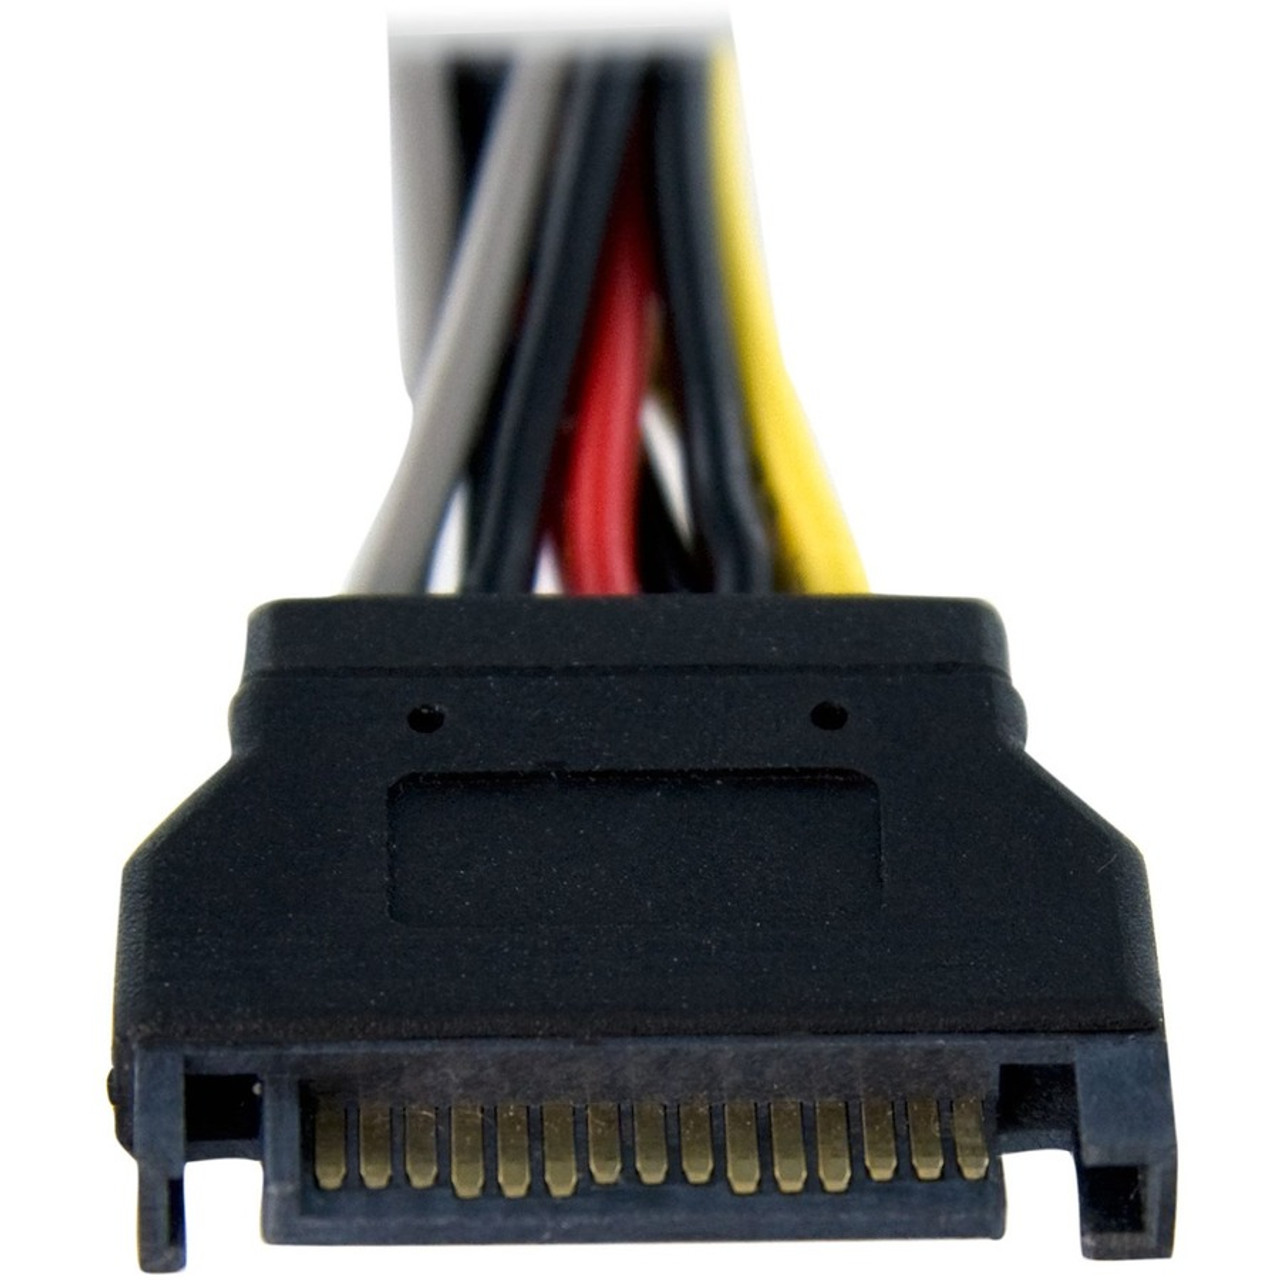 6in Sata Power Y Splitter Cable Adapter - 6" - Startech.com Pyo2sata - image 3 of 3